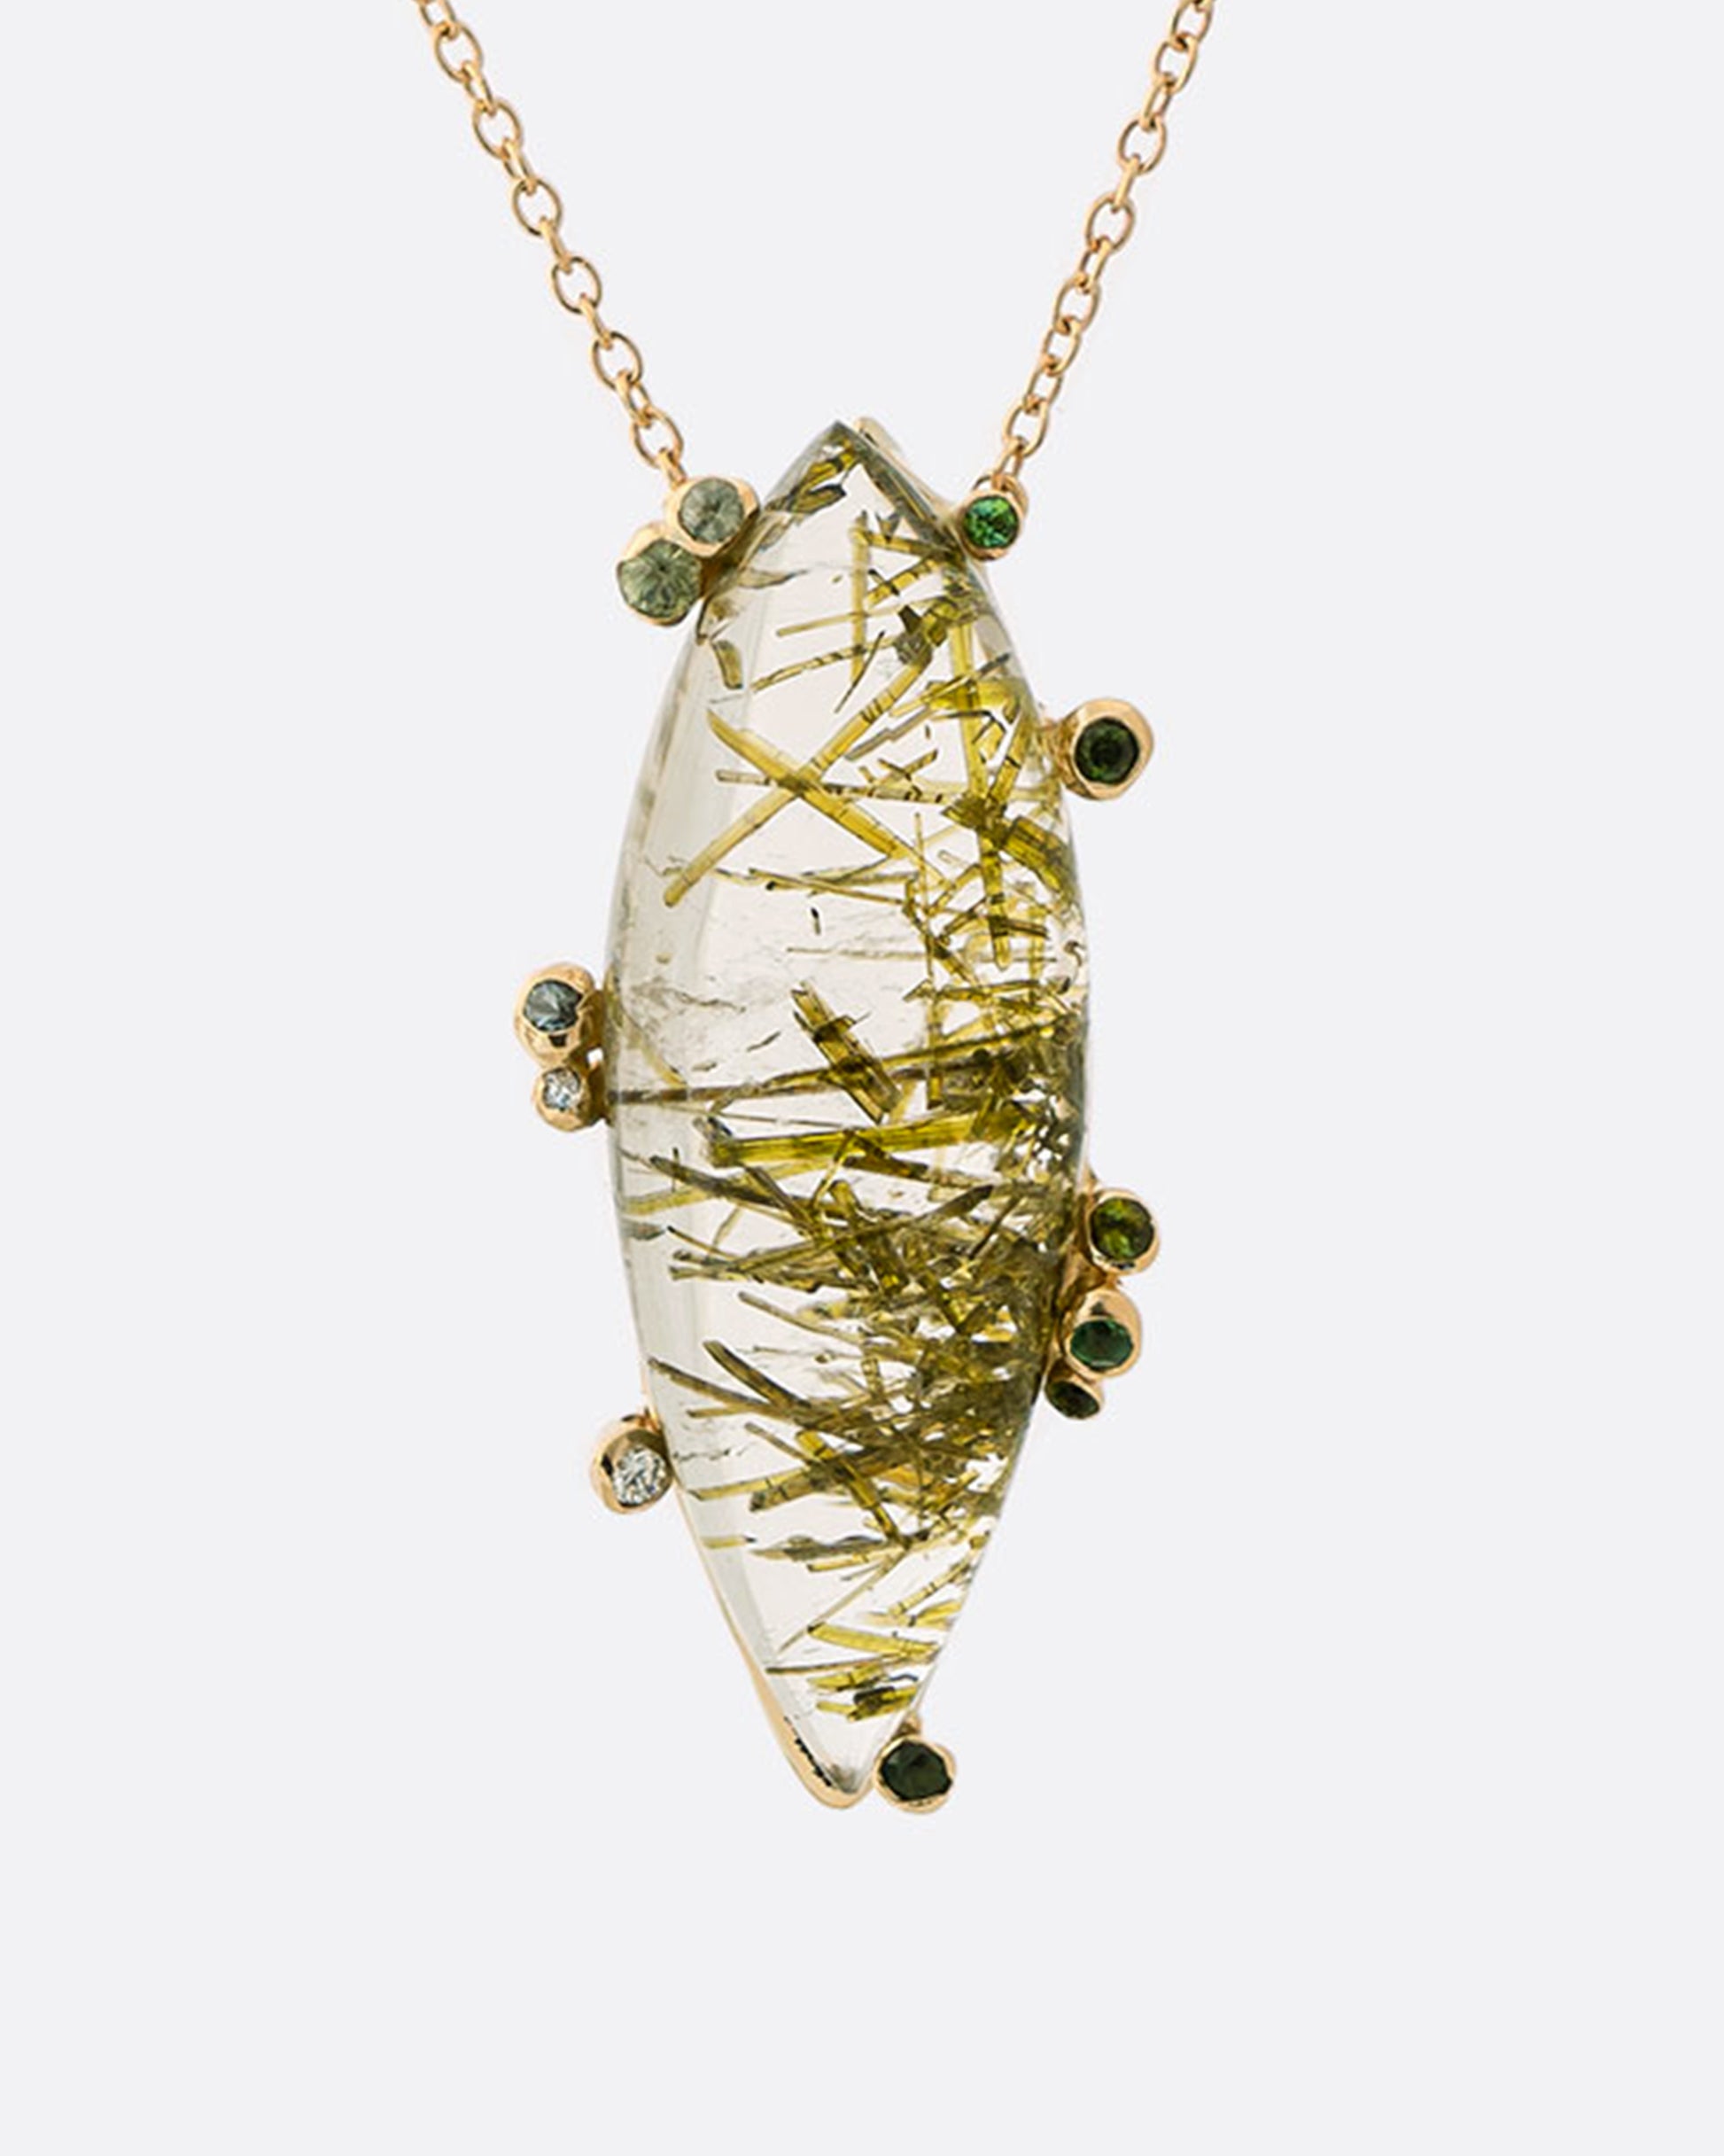 This quartz pendant has a garden of green tourmaline needle inclusions grown within